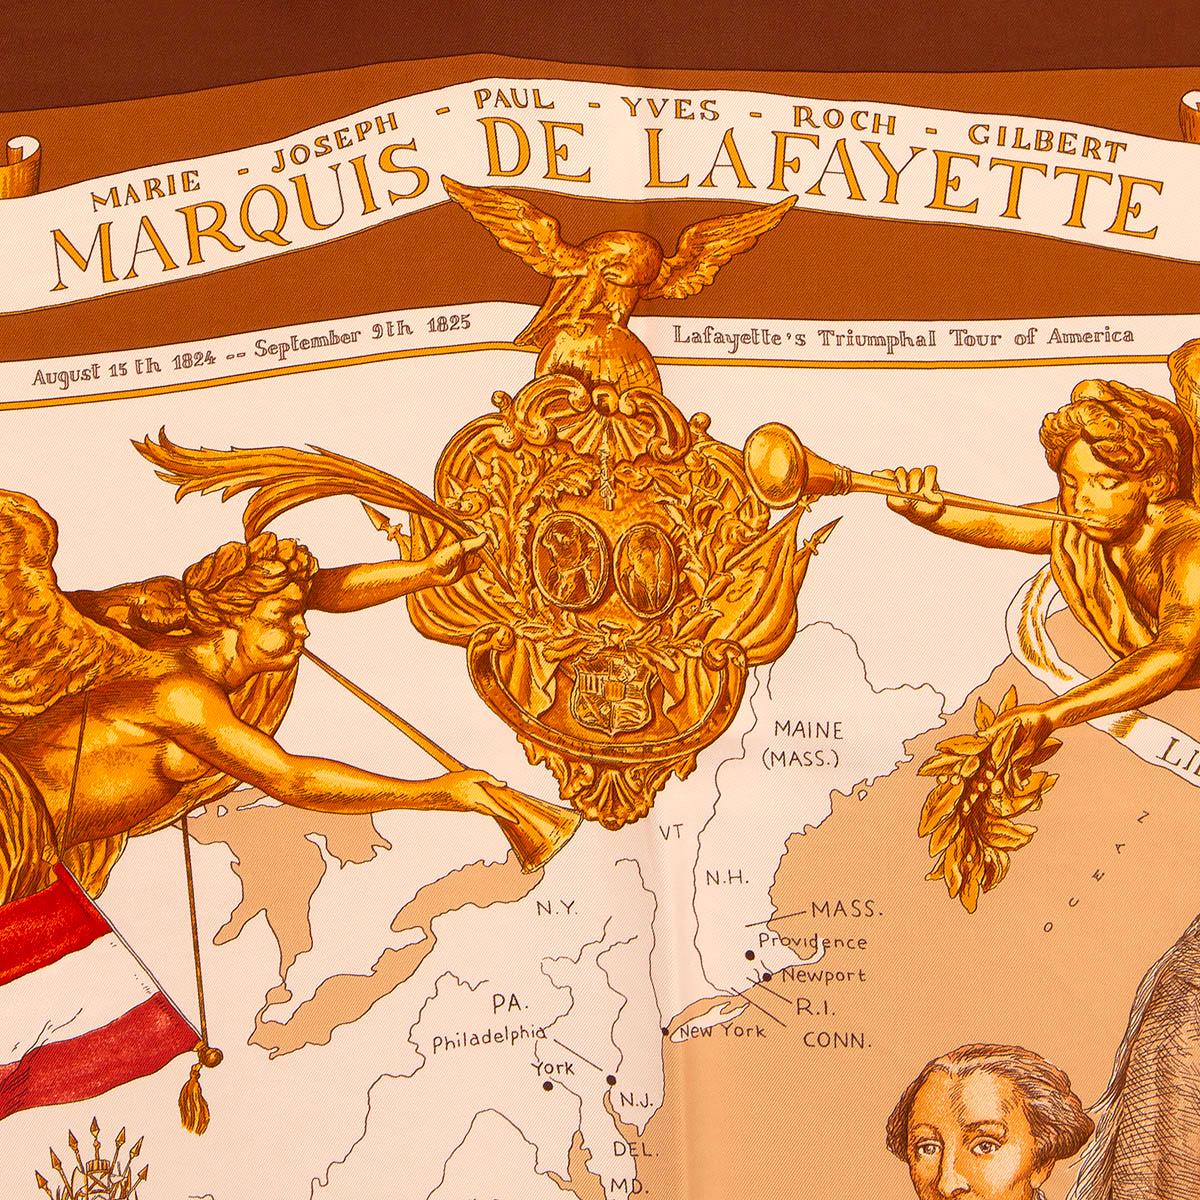 100% authentic Hermès 'Marquis de Lafayette 90' scarf by Kermit Oliver in bronze and brown silk twill (100%) with details in beige, gold, white and red. Has been worn and is in excellent condition.


Issued in 2007

Measurements
Width	90cm